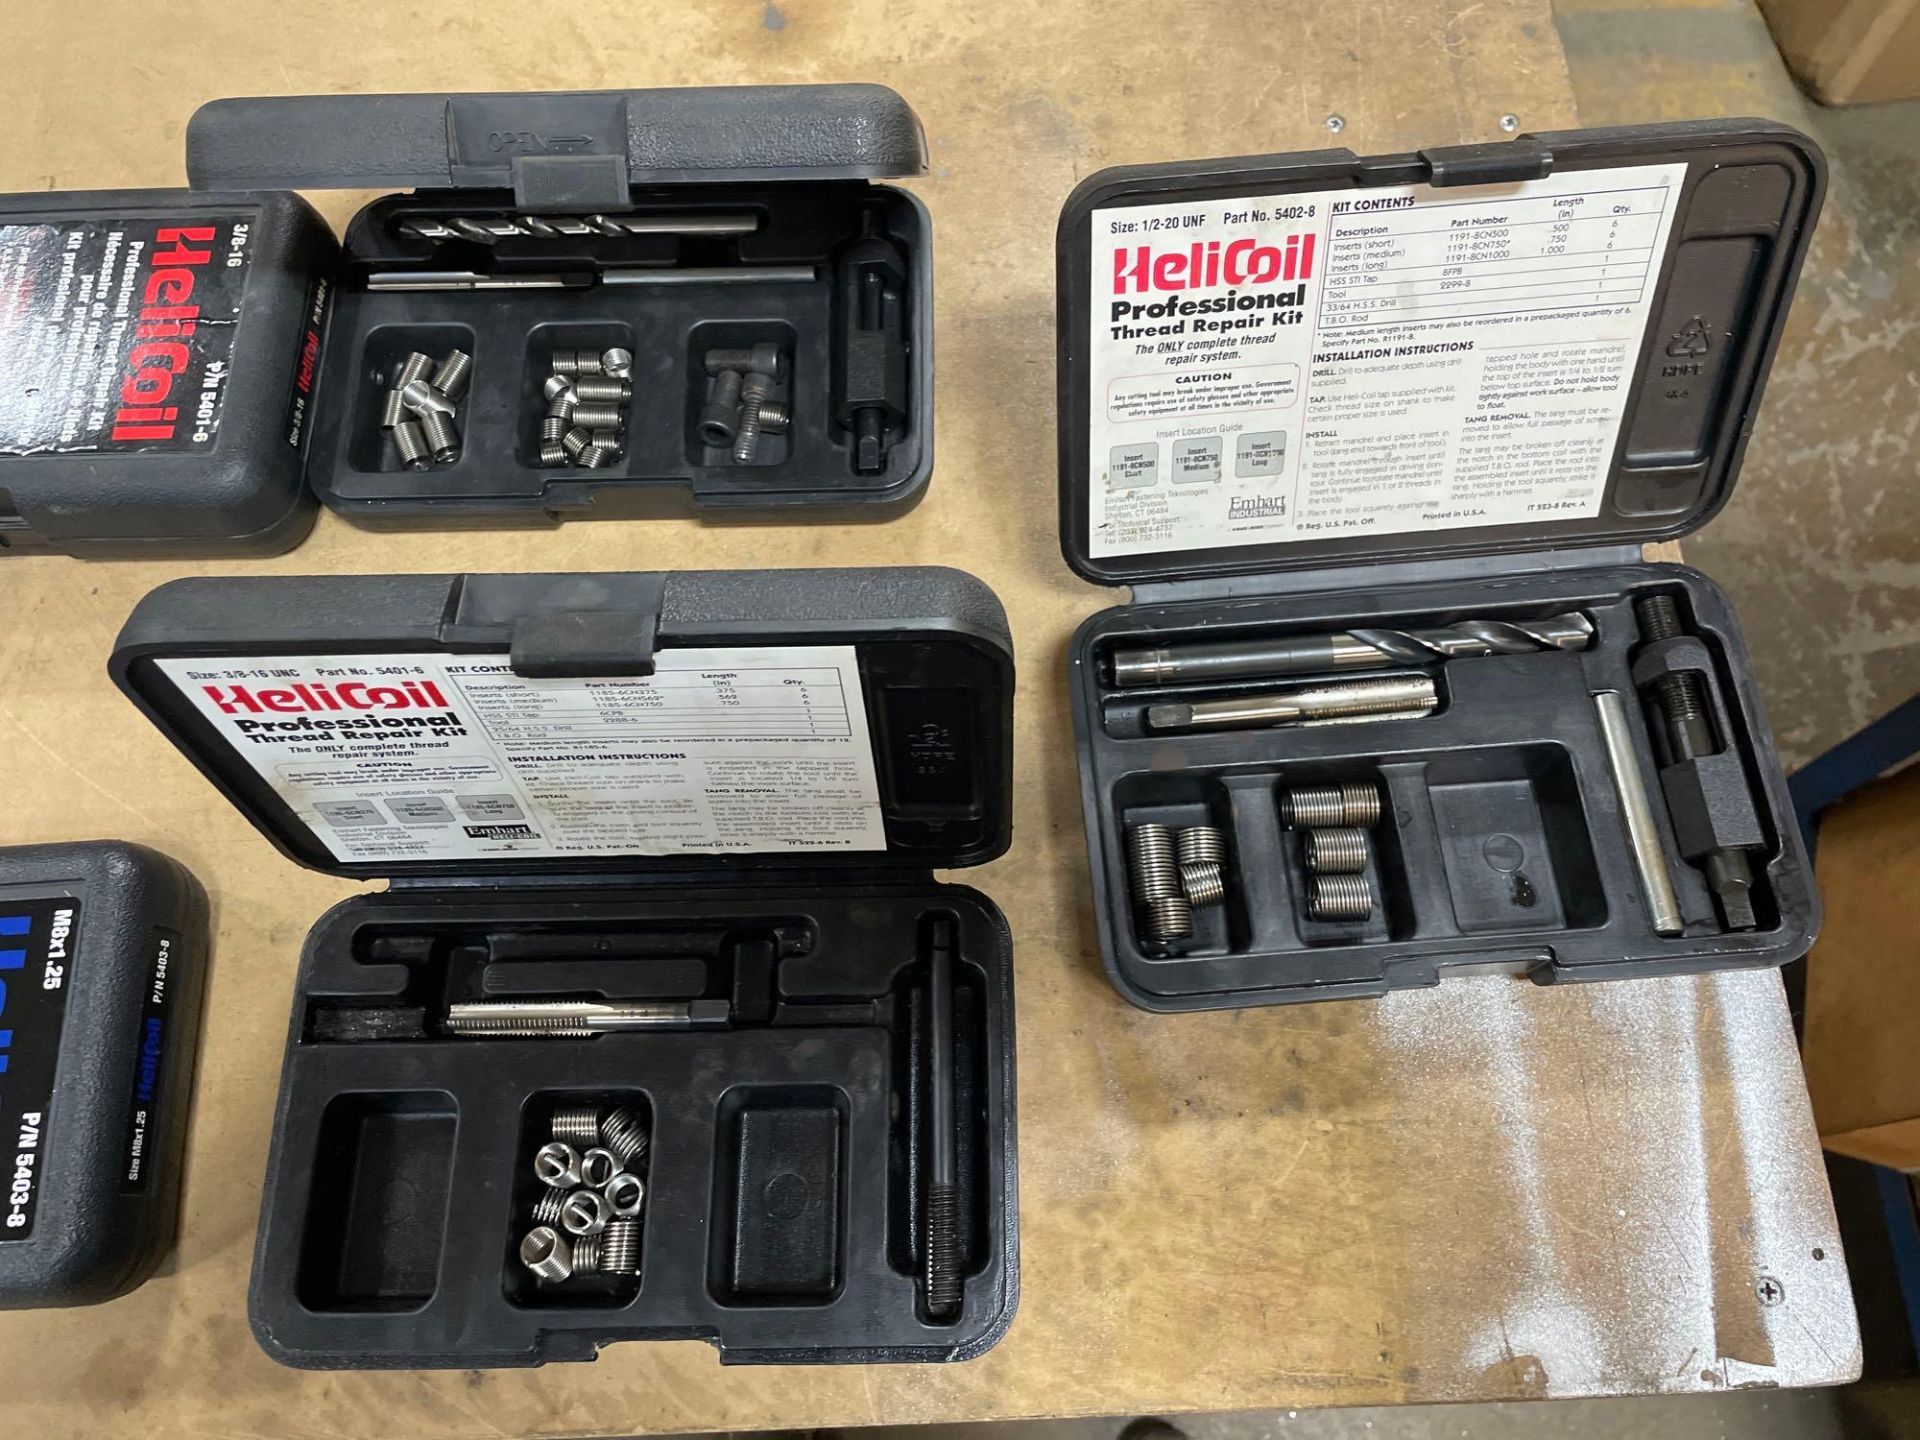 Lot of Helicoil Thread Repair Kits - Image 6 of 6